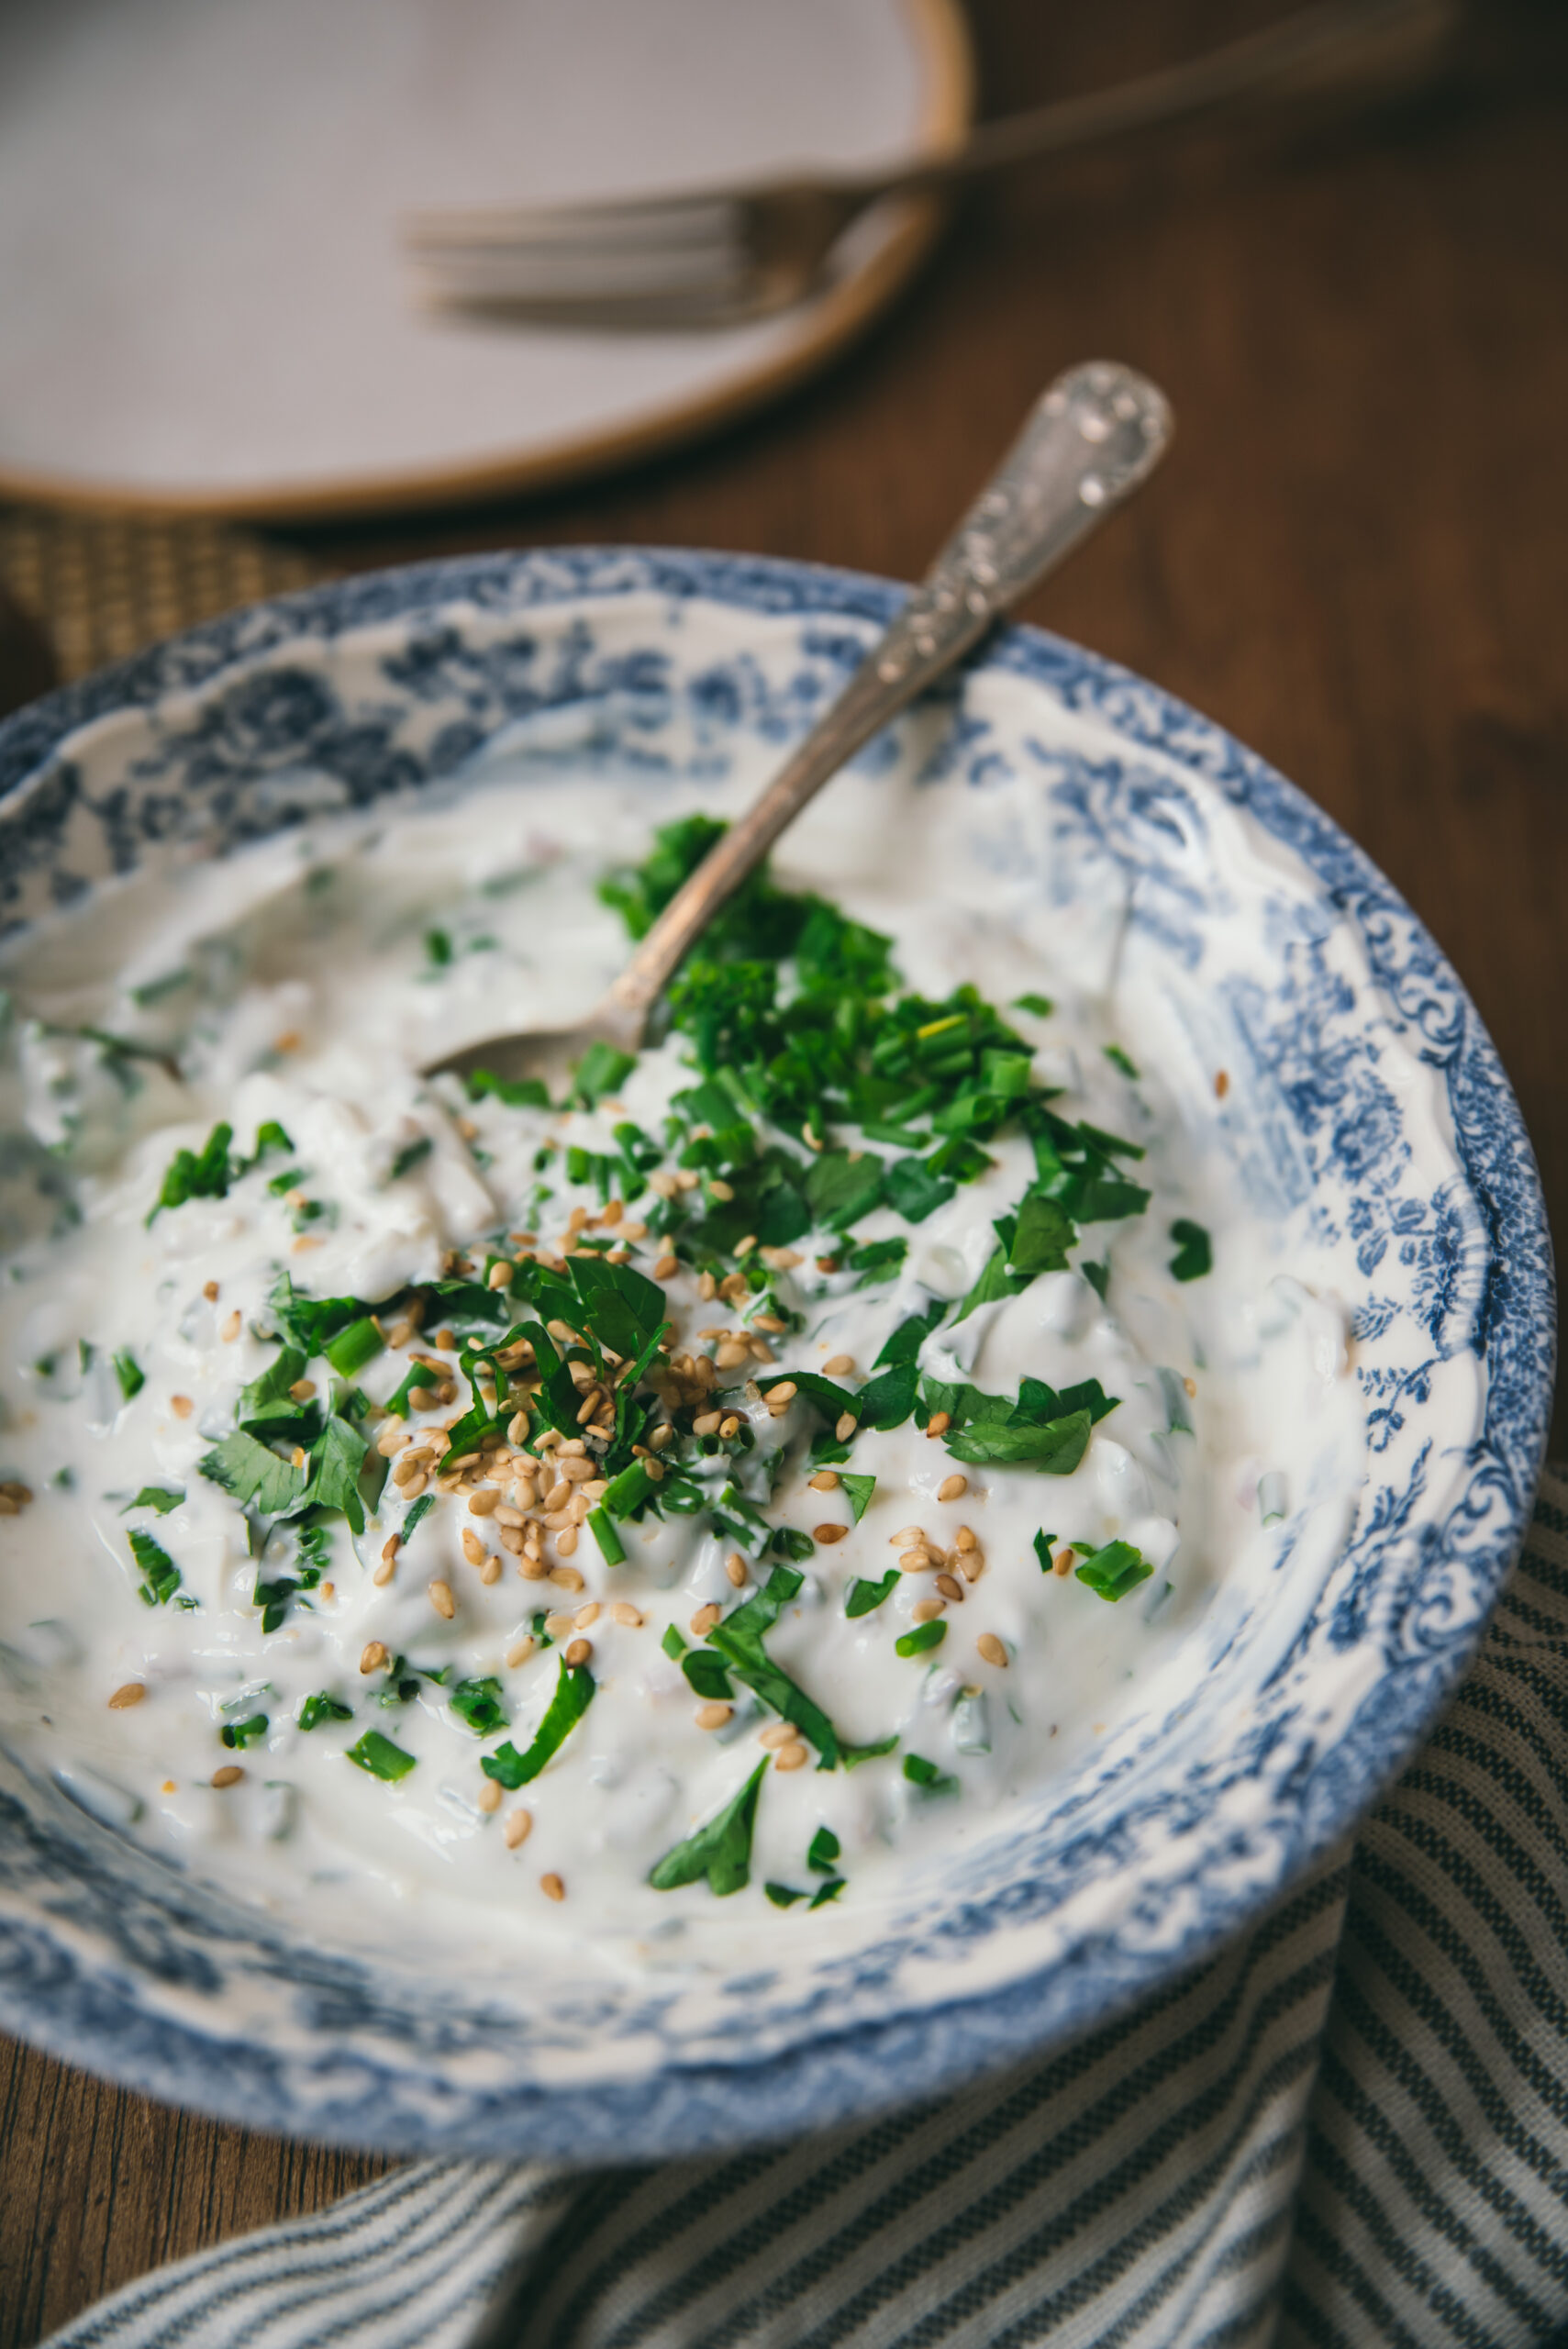 Garlic and Chive Cottage Cheese Dip Recipe